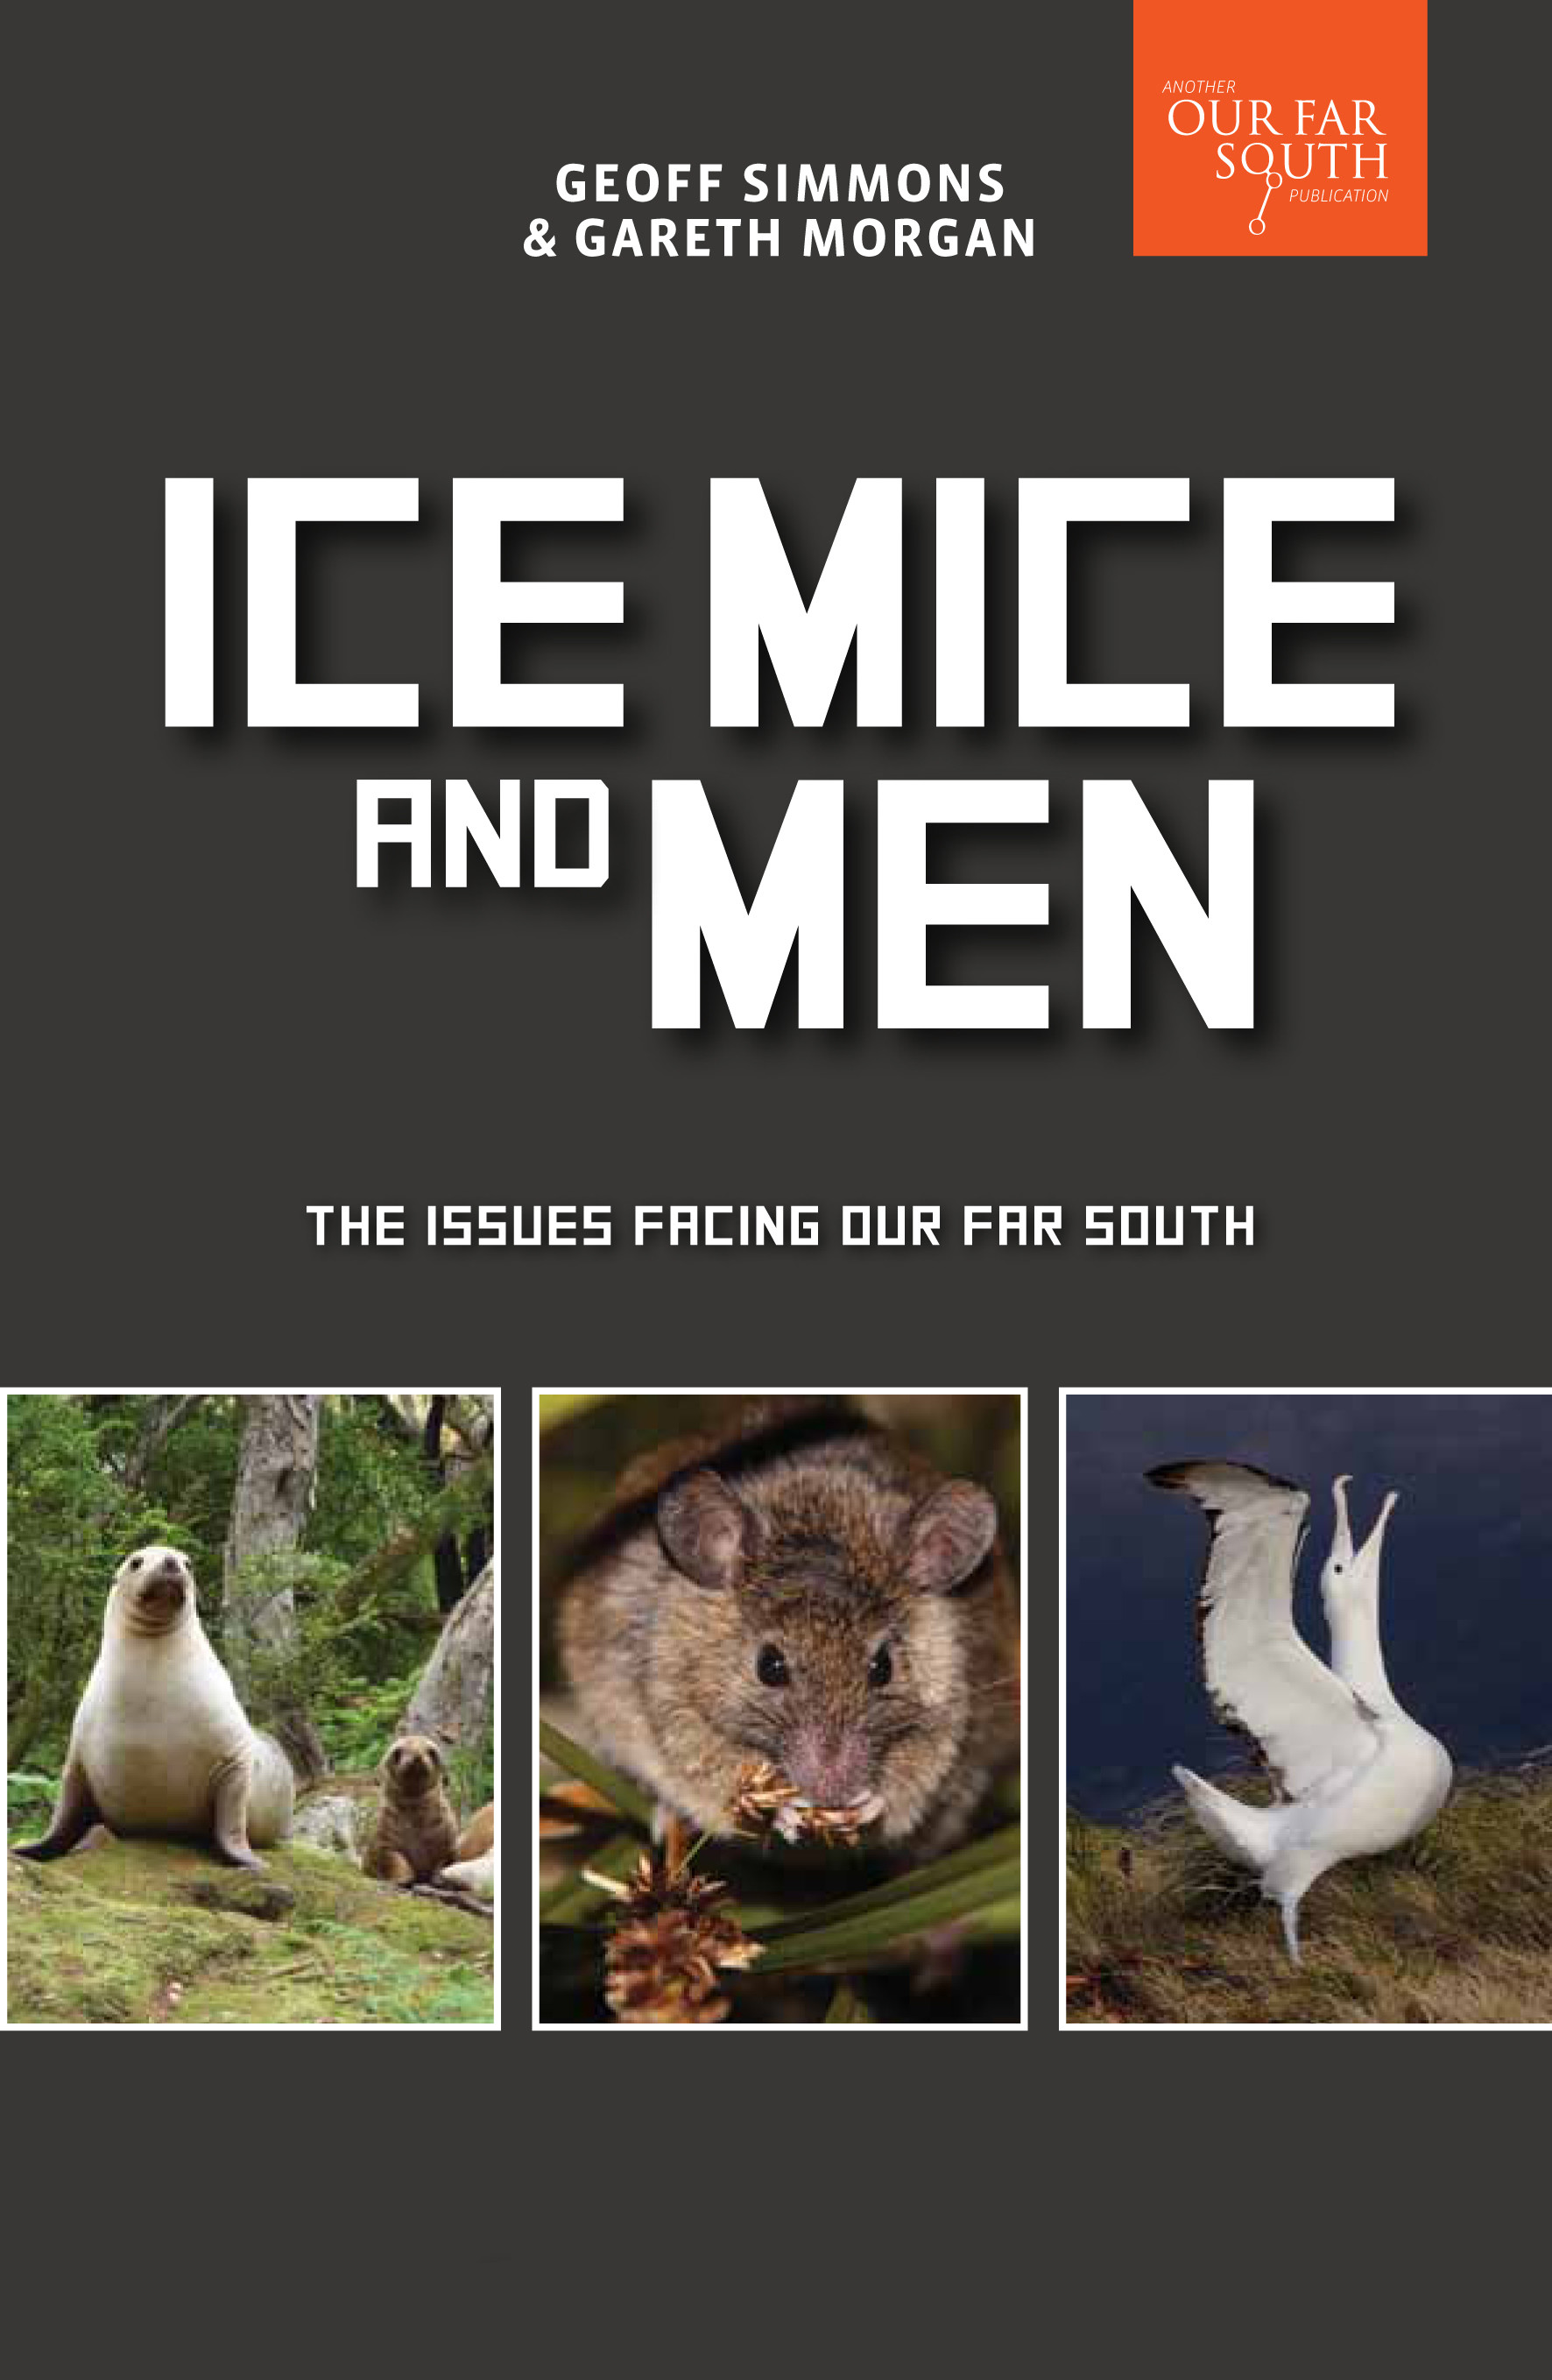 Ice, Mice and Men